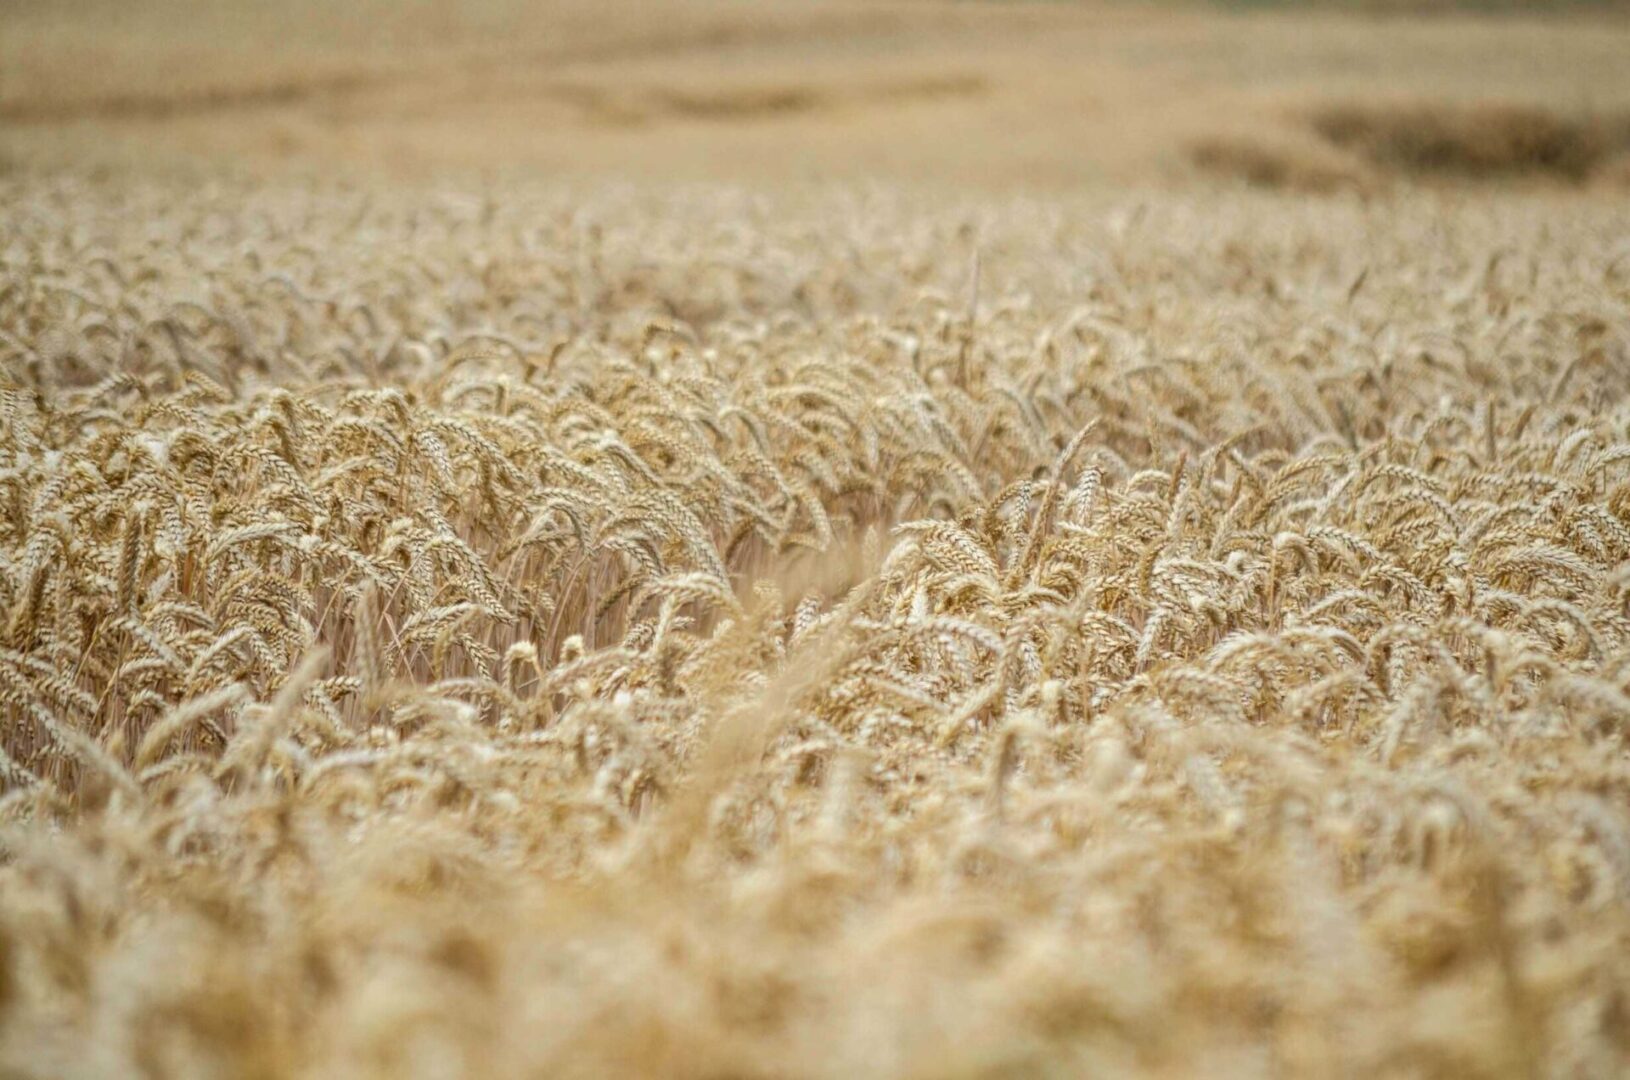 A field of wheat is shown in the distance.